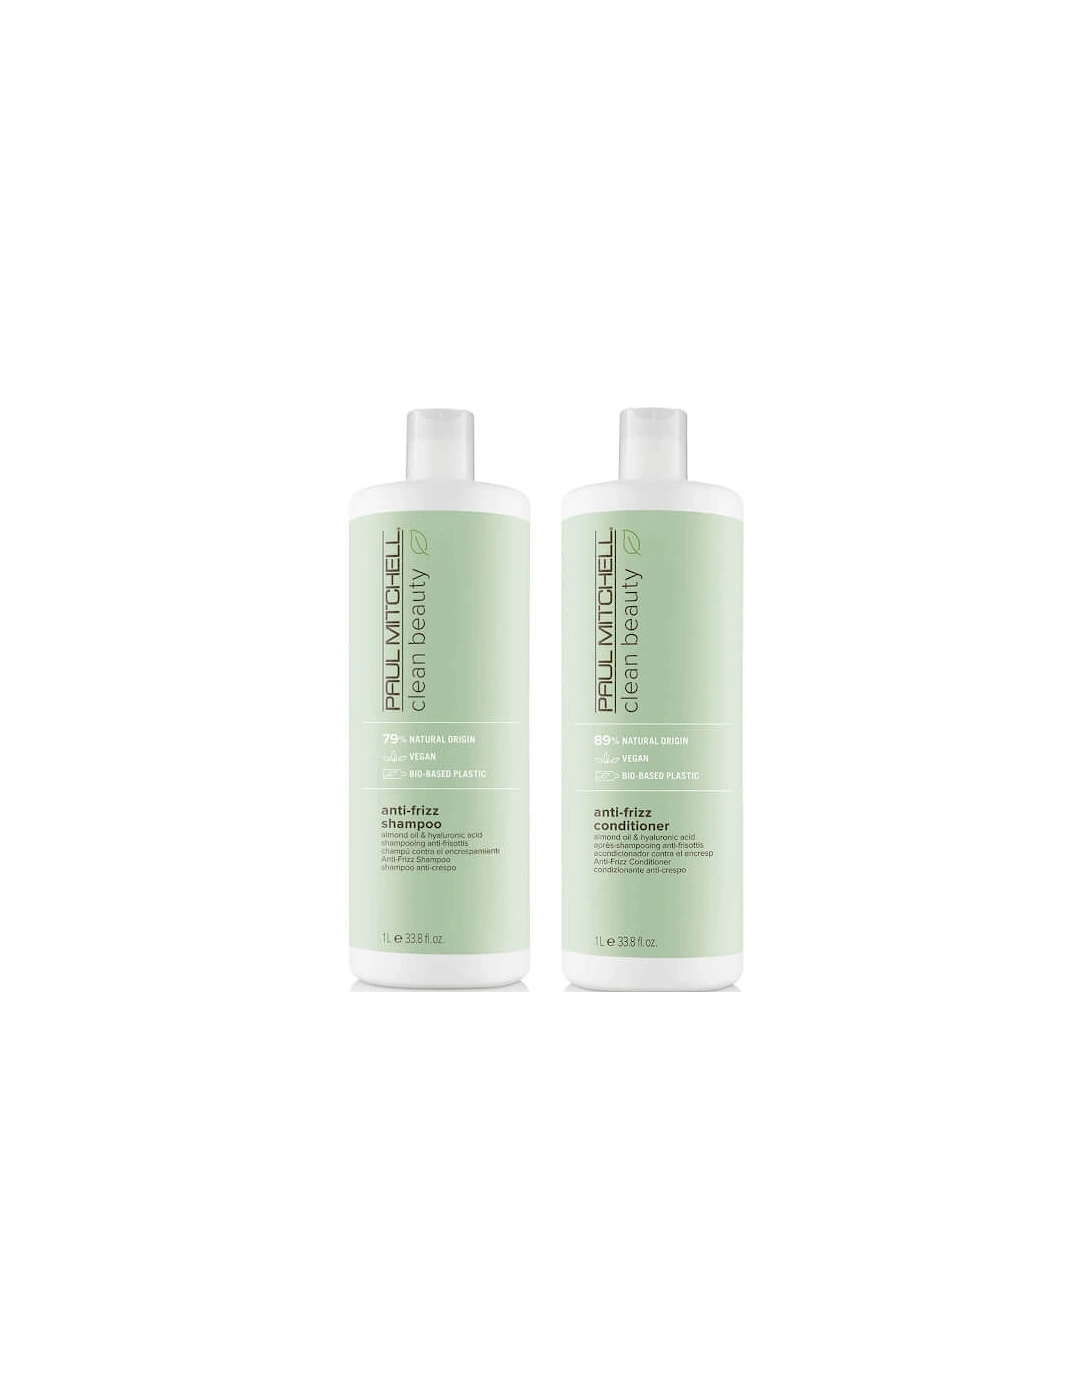 Clean Beauty Anti-Frizz Shampoo and Conditioner Supersize Set, 2 of 1